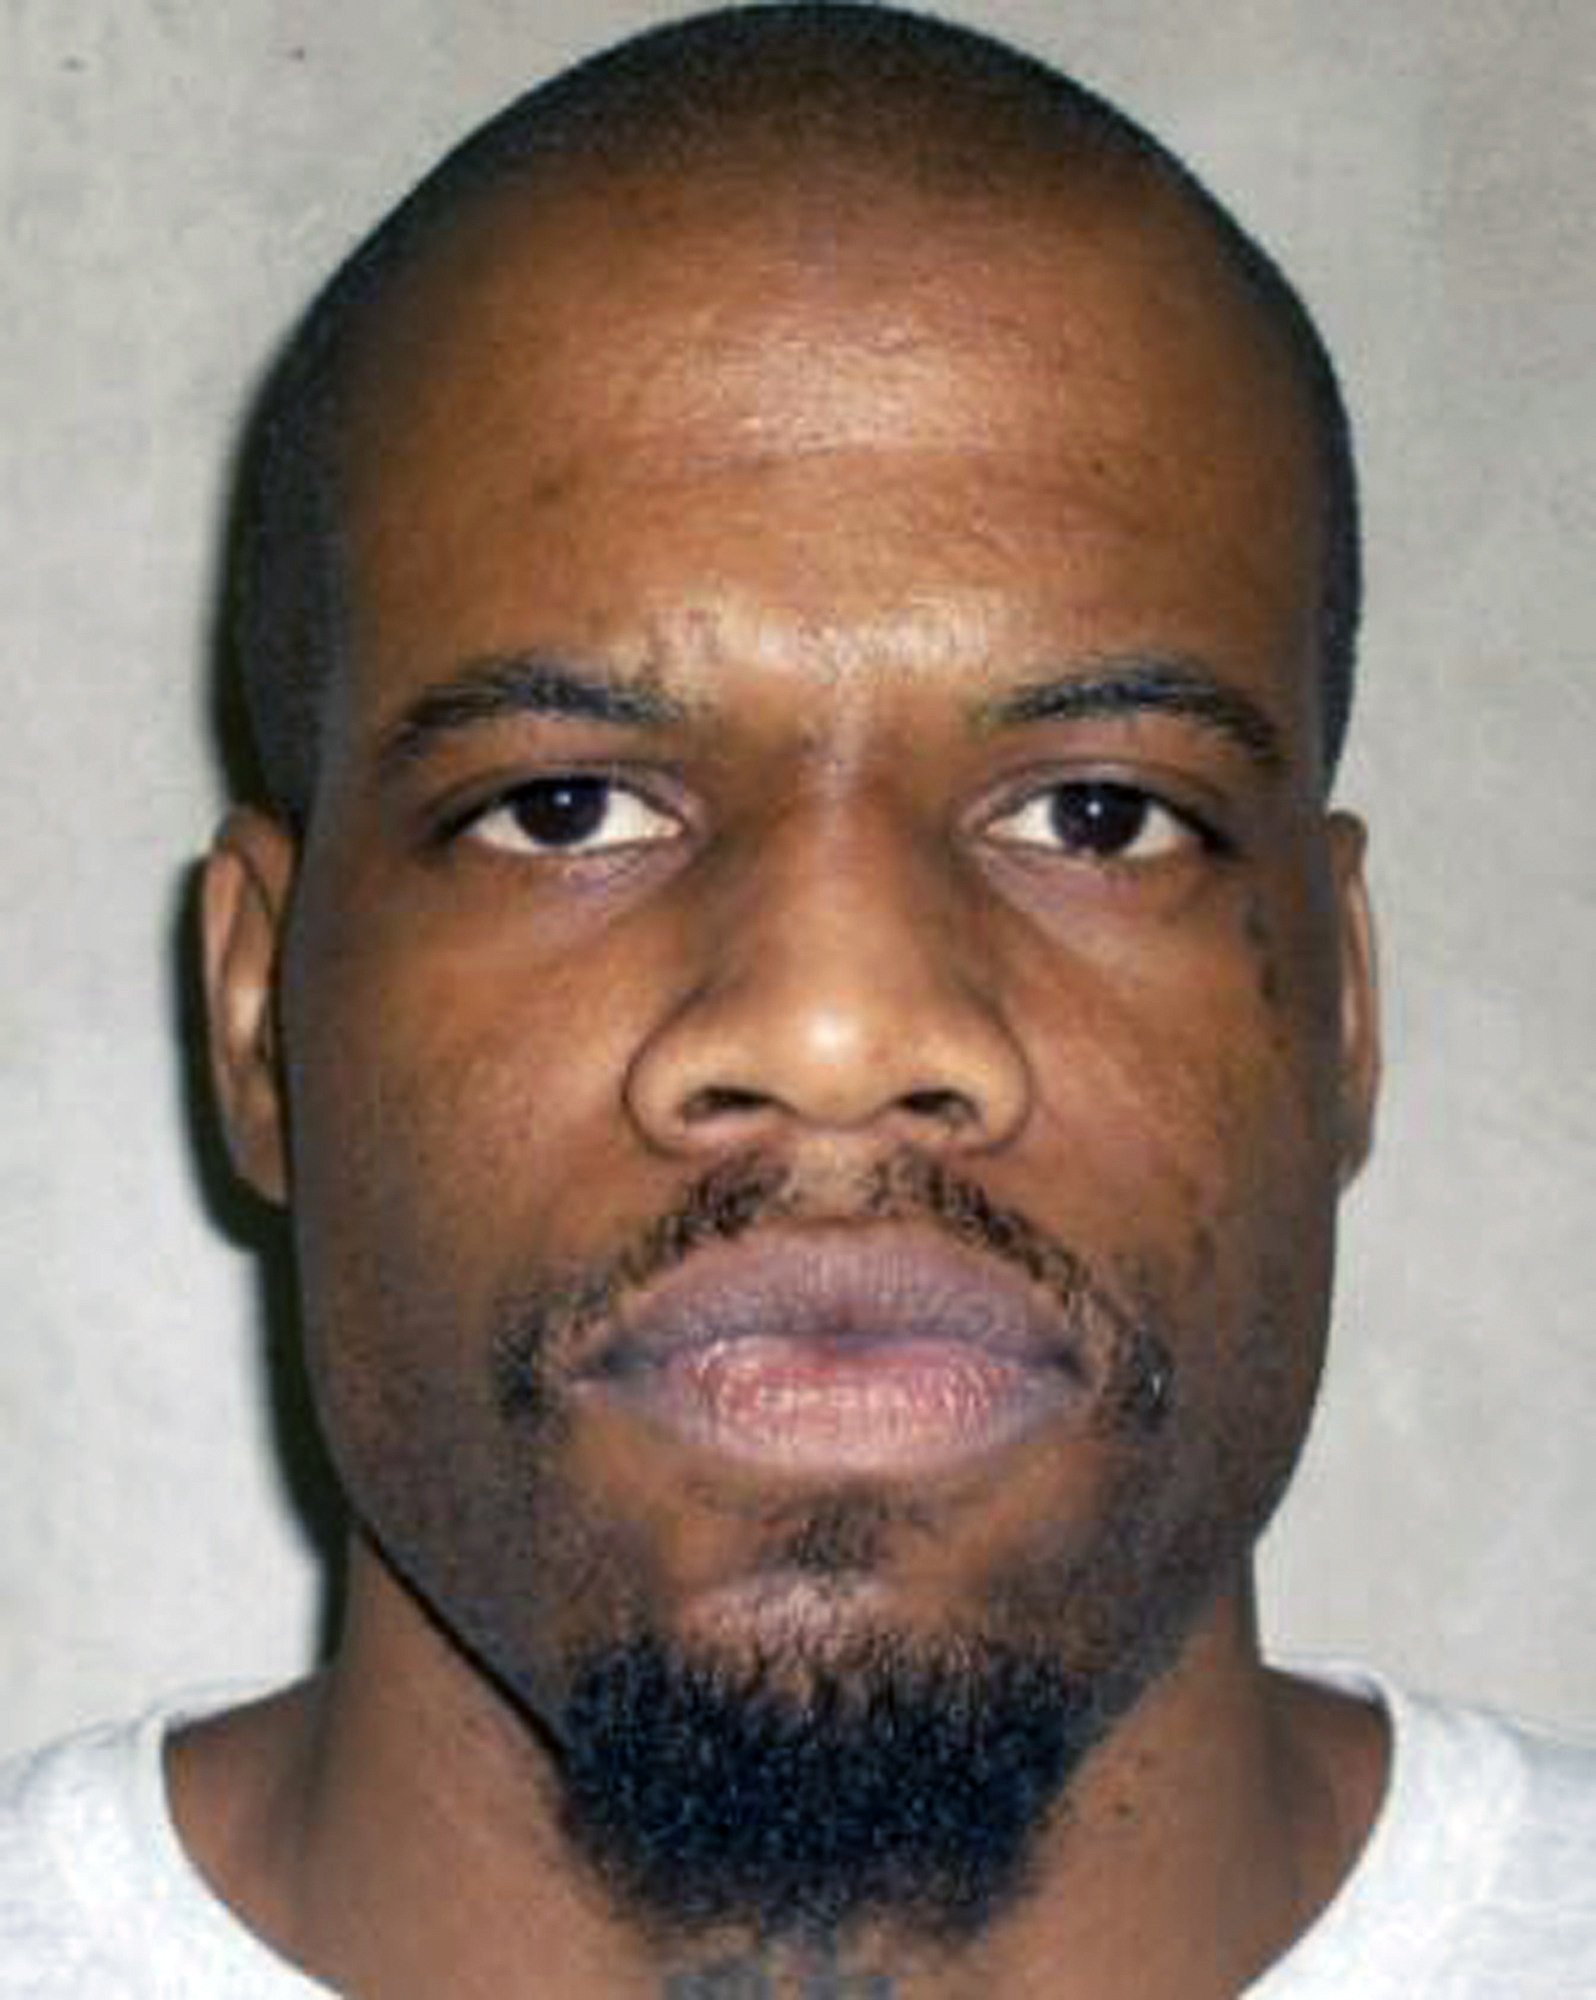 Doctors testified on Wednesday that Clayton Lockett, a death row inmate seen here in this June 29, 2011, file photo, likely suffered during his prolonged execution on April 29, 2014. (AP)